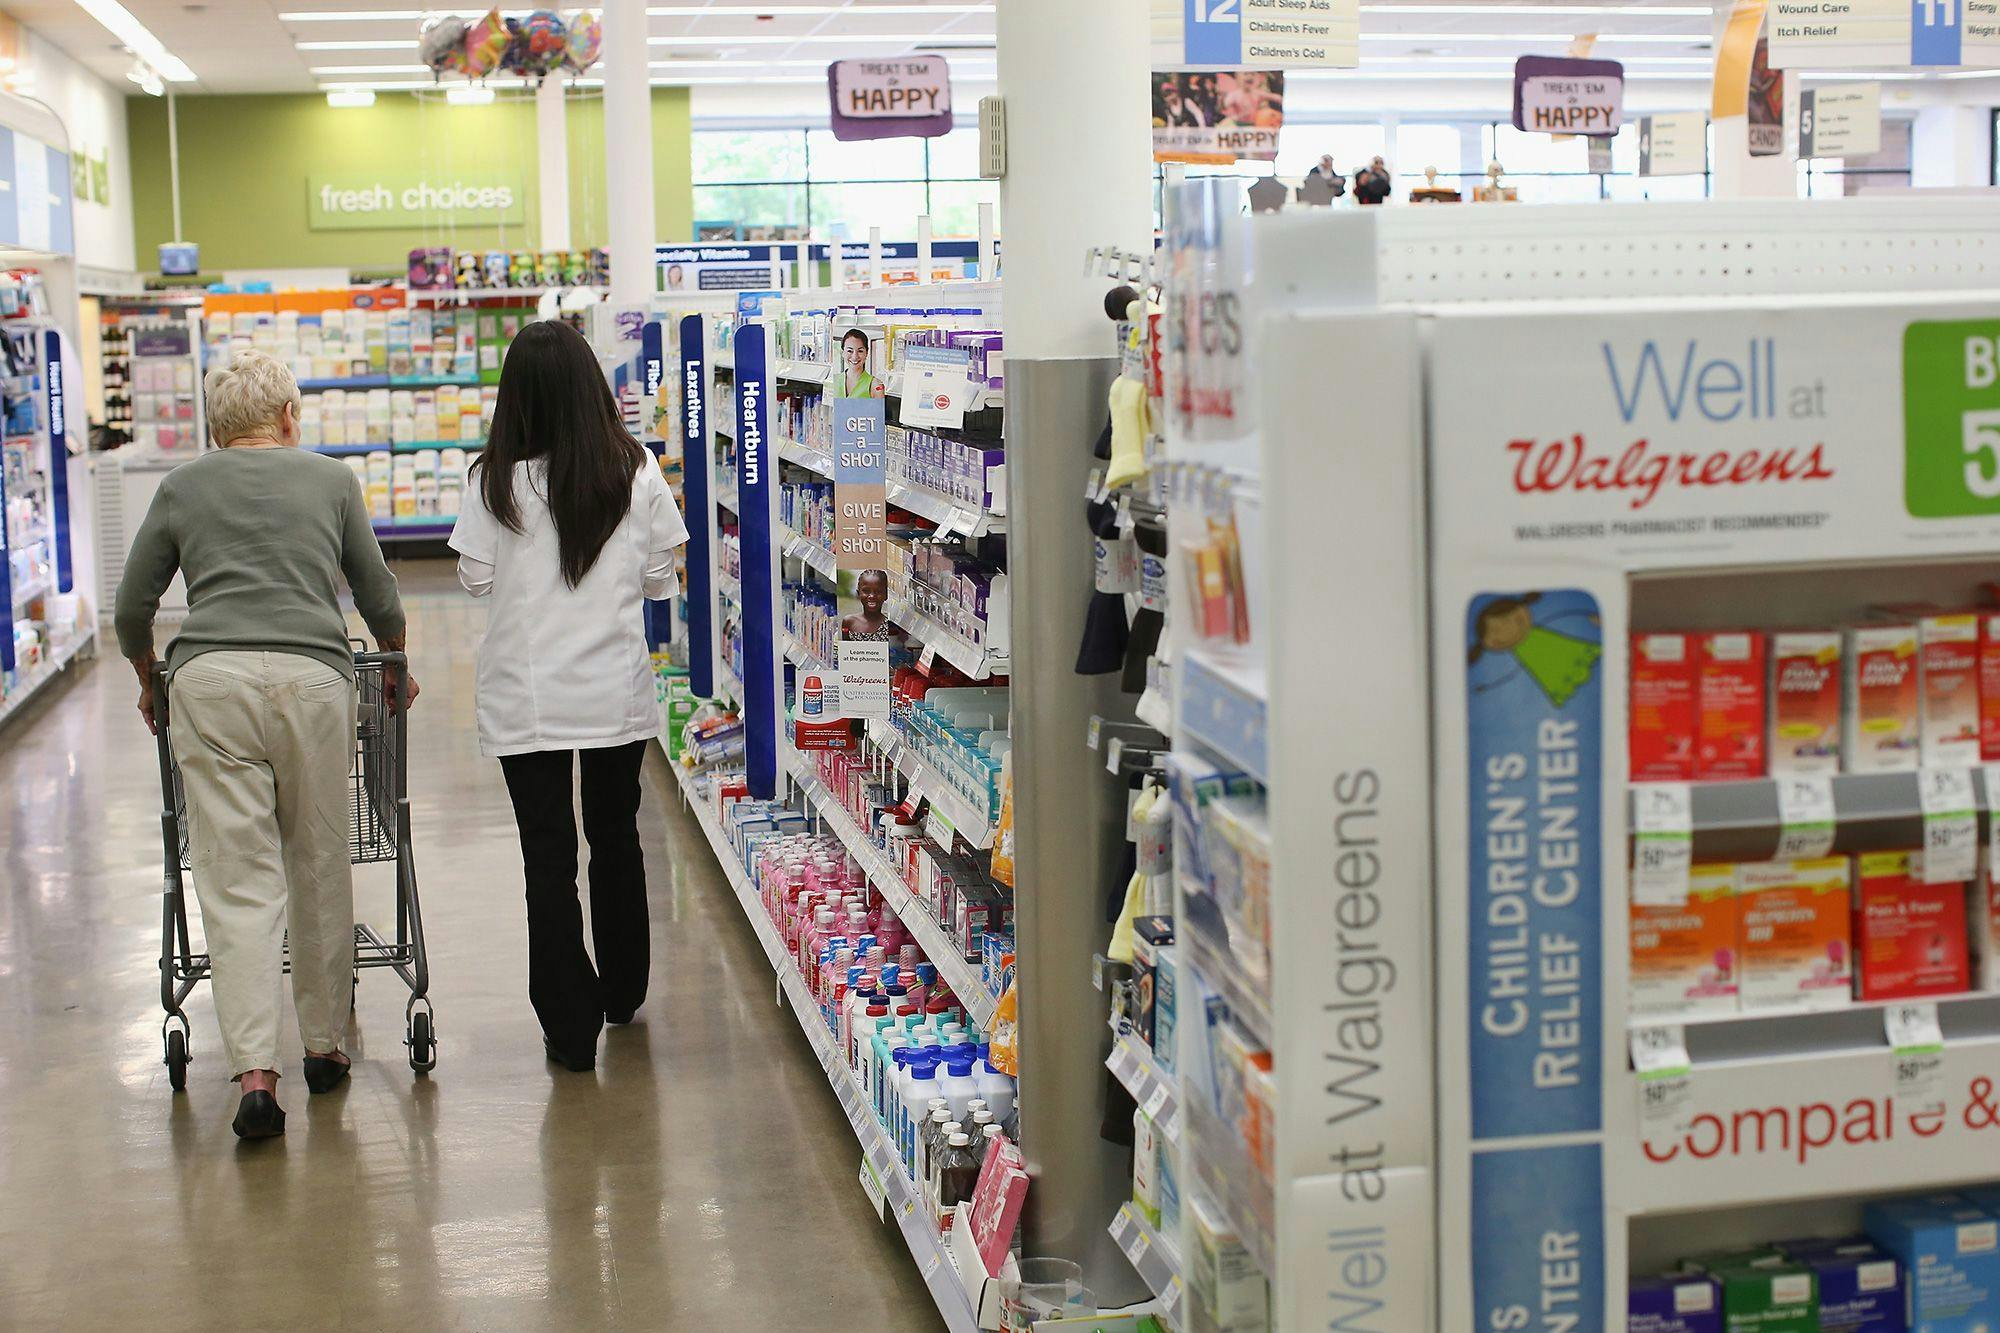 With several locations in different markets, Walgreens says this should affect few people.